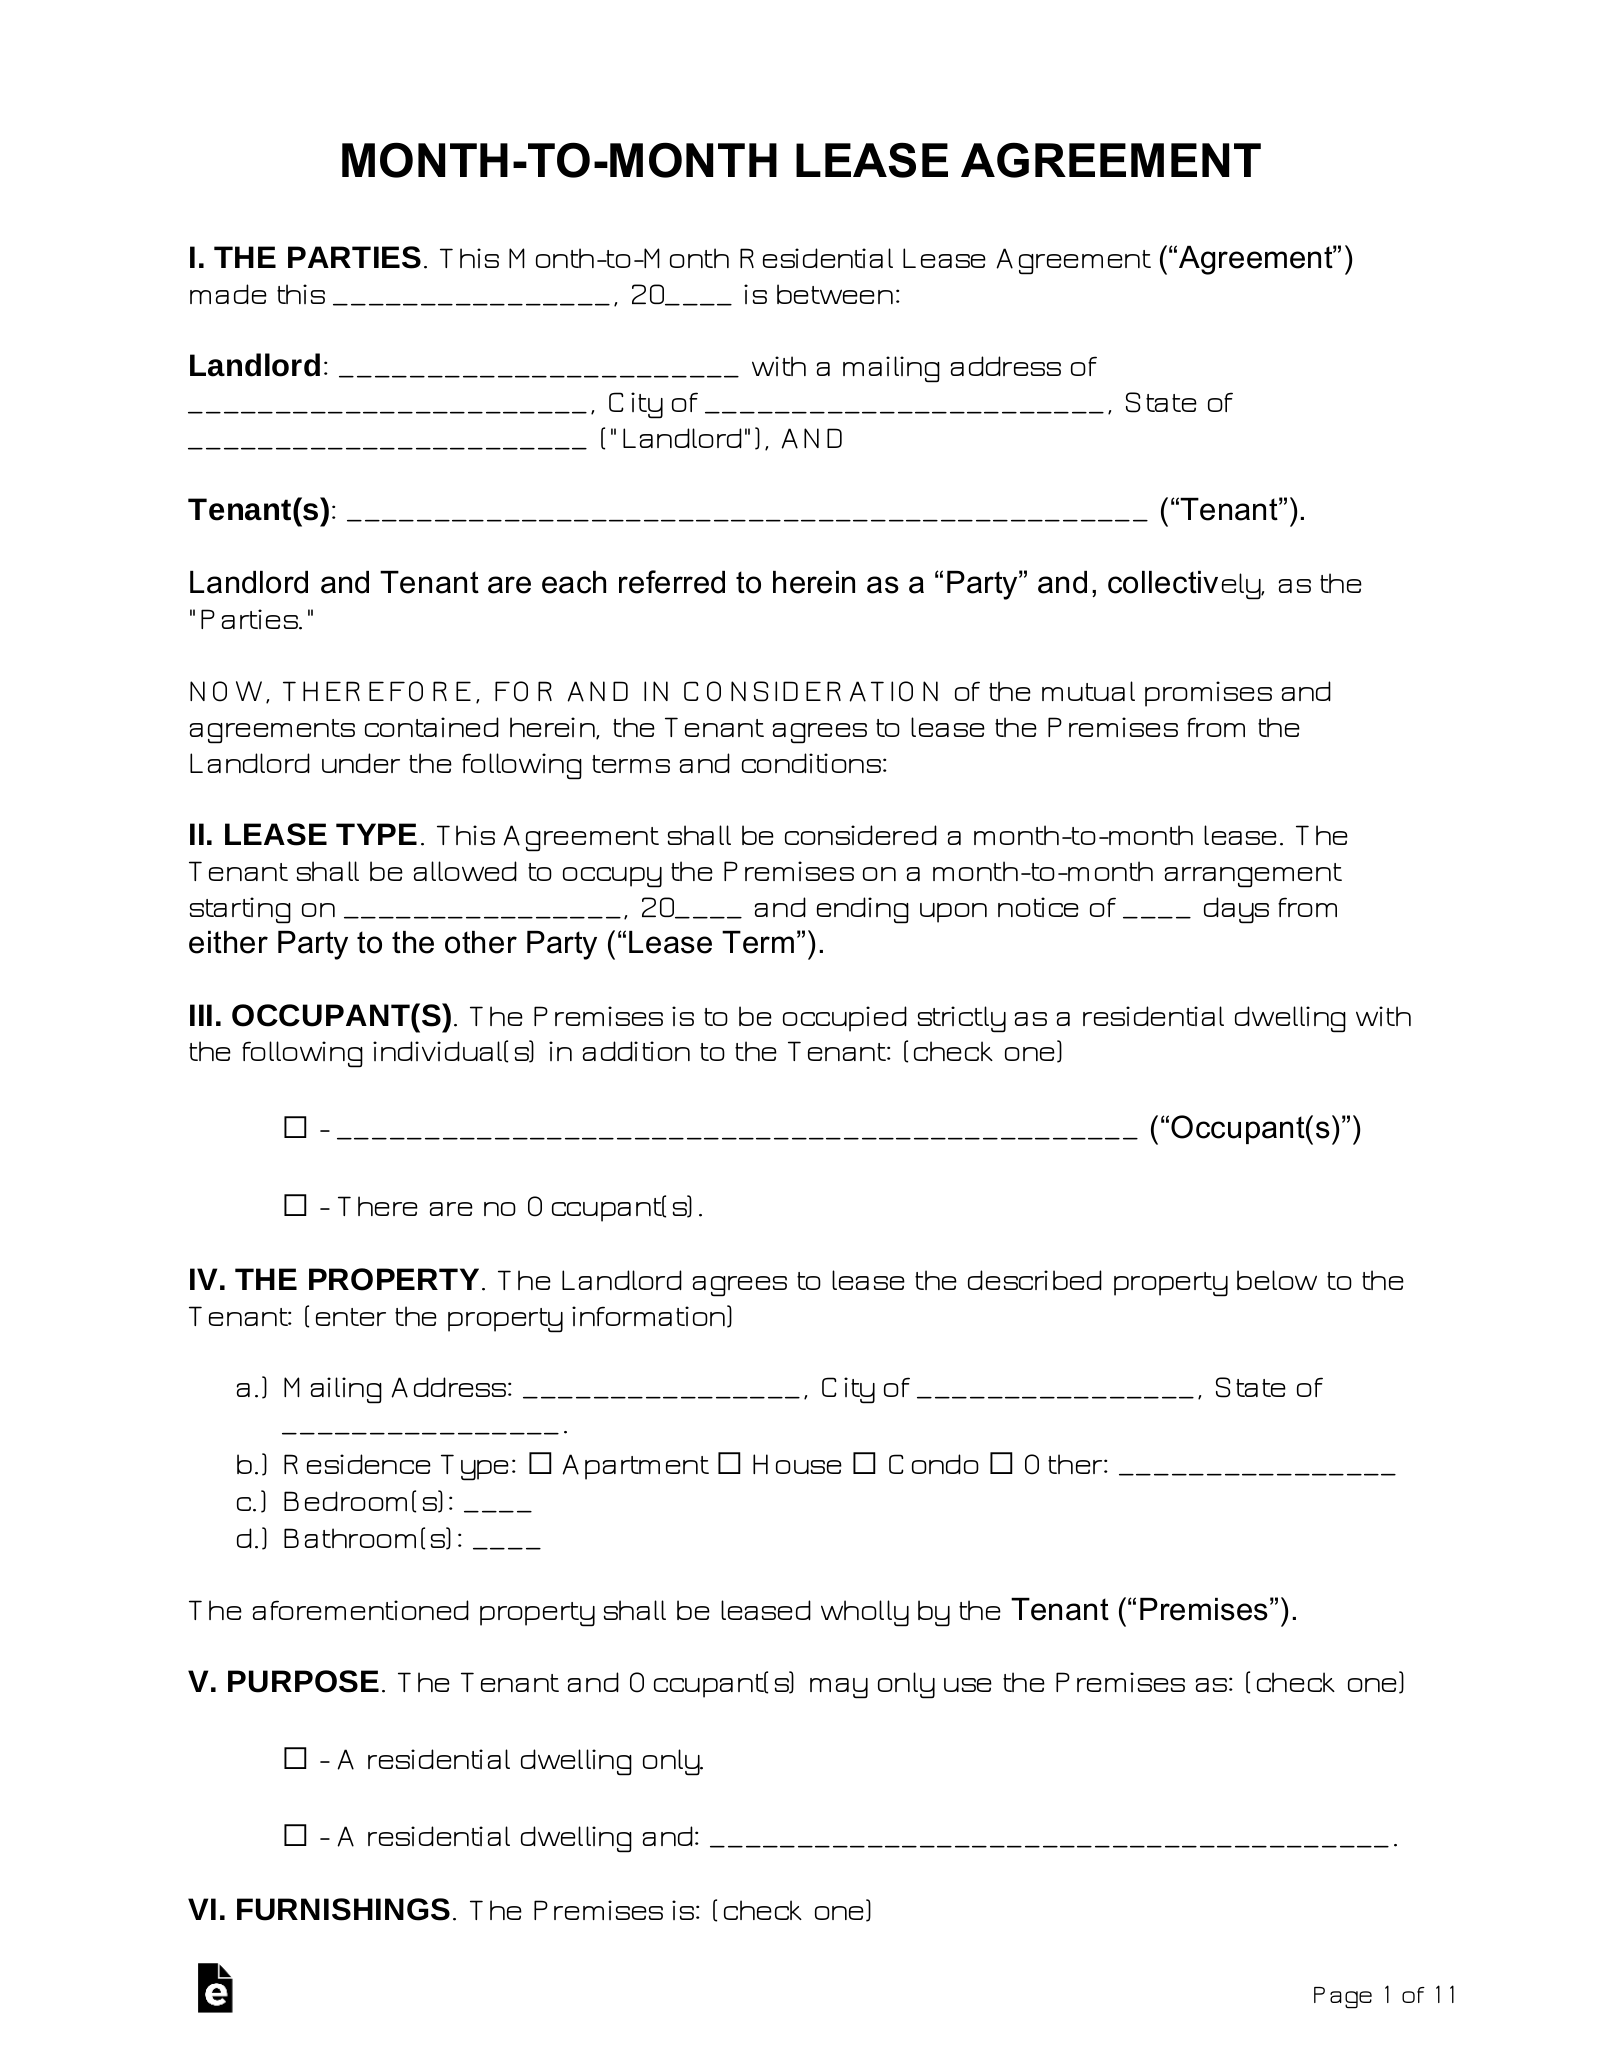 Short Term Rental Agreement Template from eforms.com